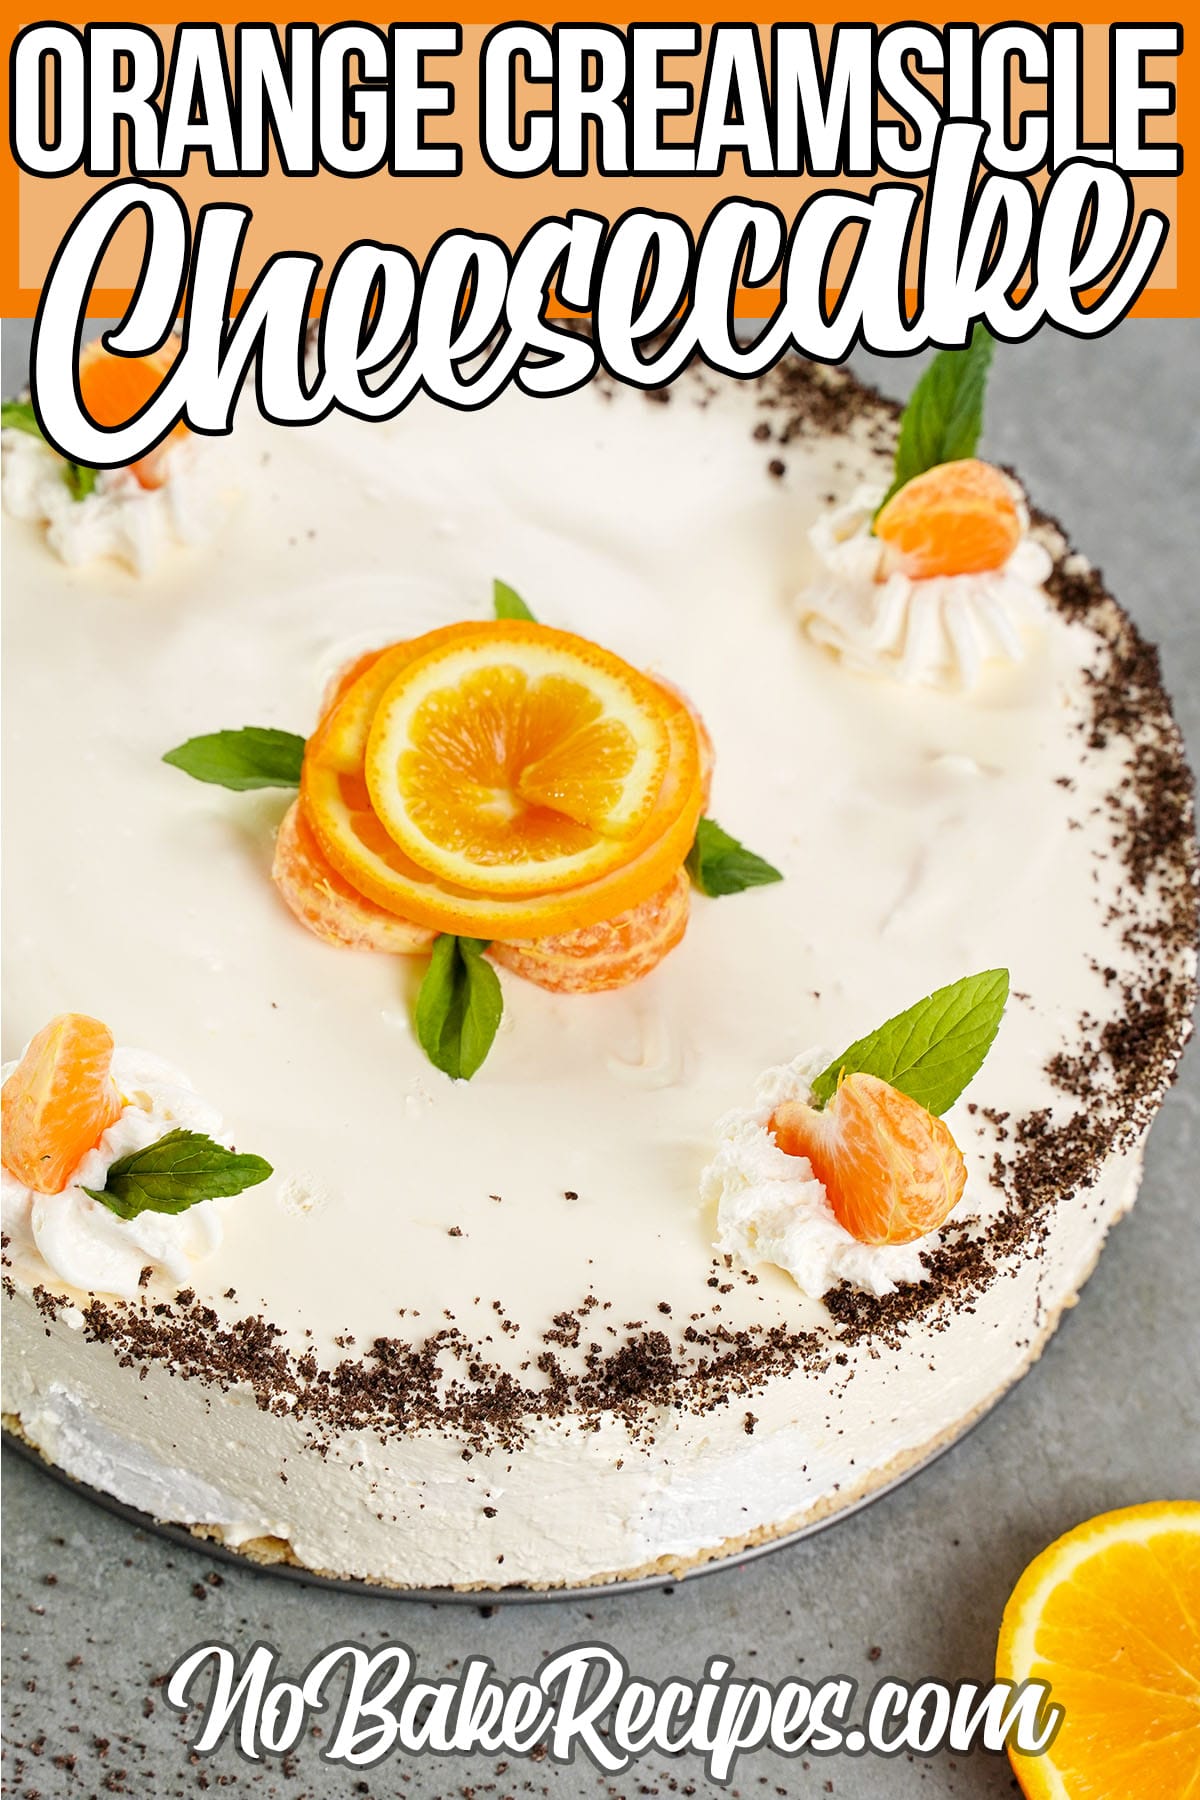 orange cheesecake with text which reads Orange Creamsicle Cheesecake